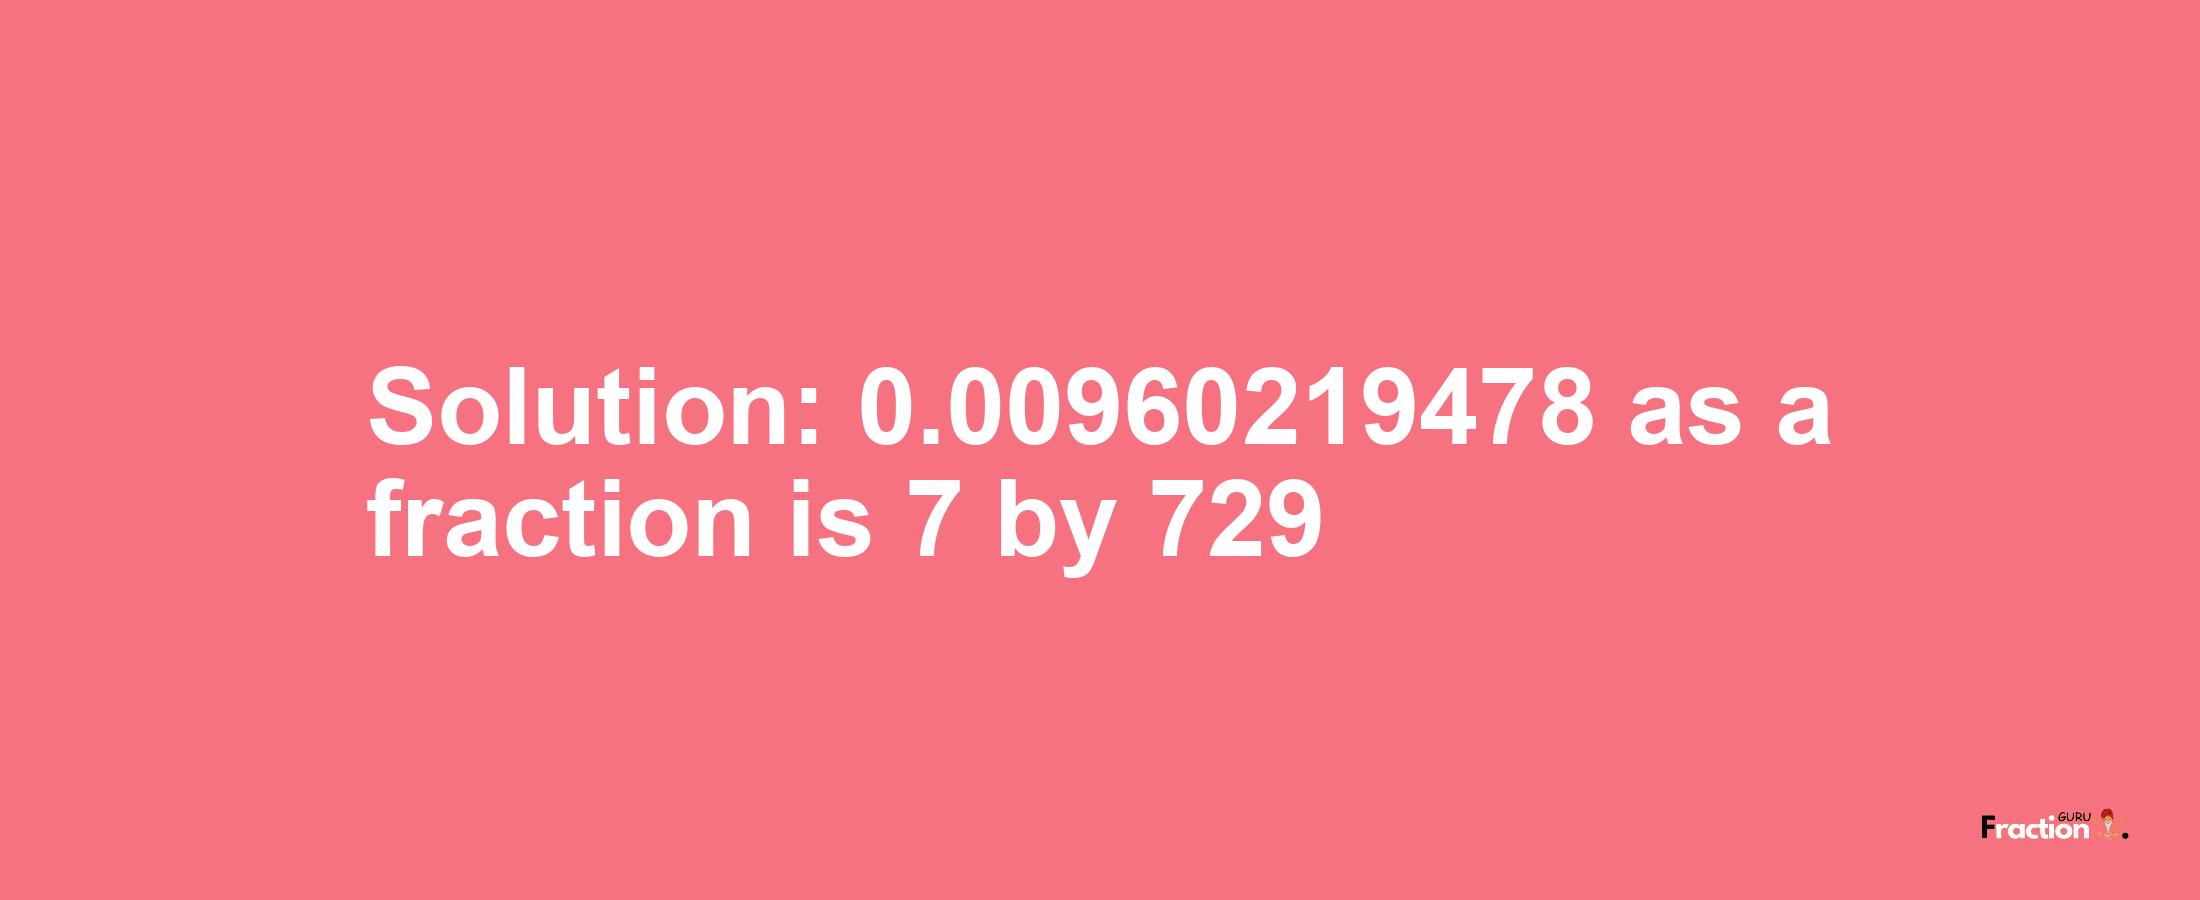 Solution:0.00960219478 as a fraction is 7/729